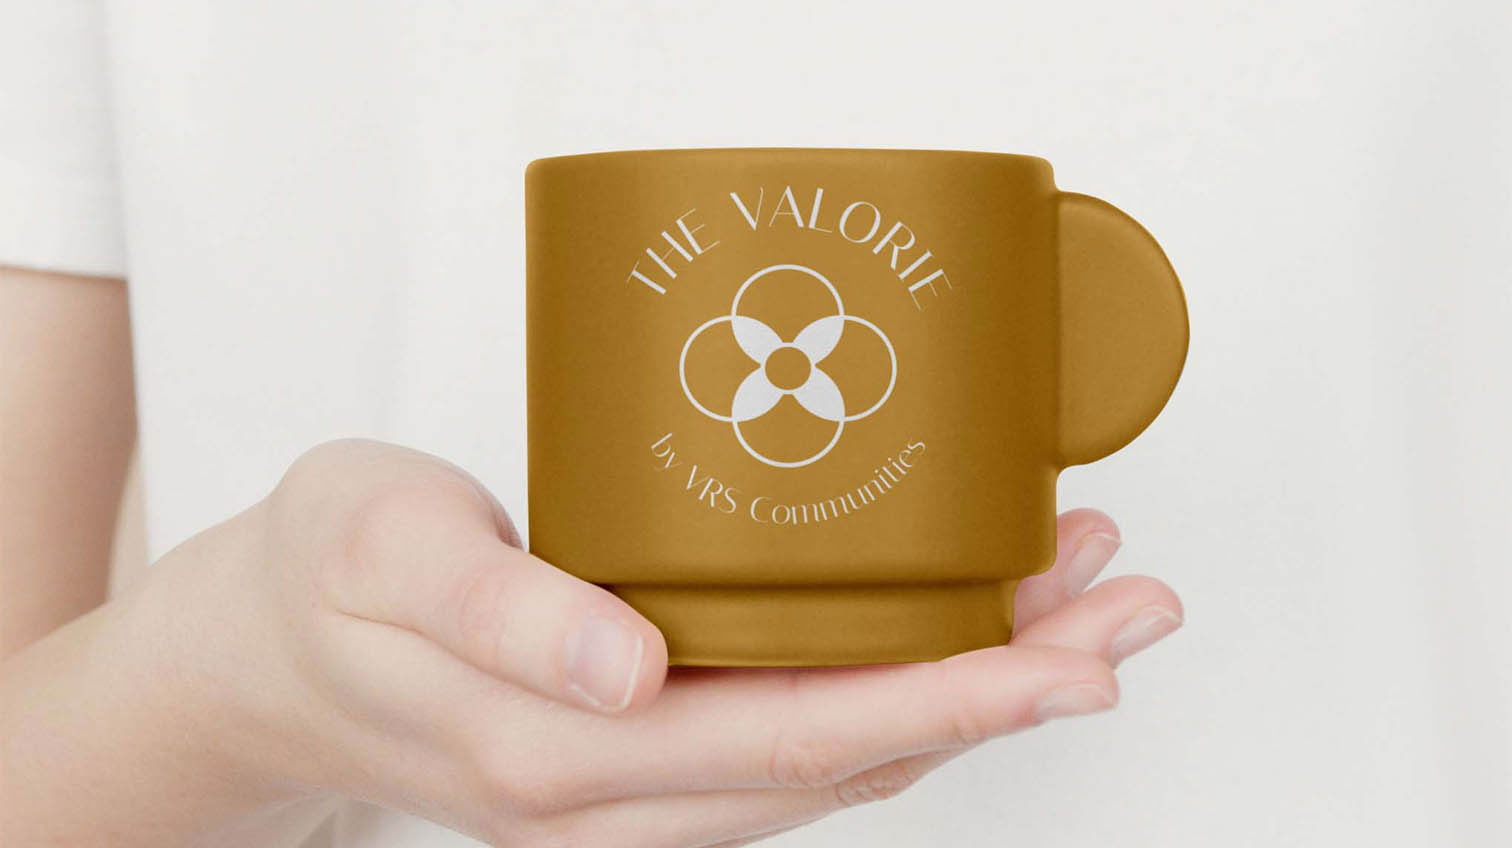 The Valorie logo and branding on a cup, by White Canvas Design